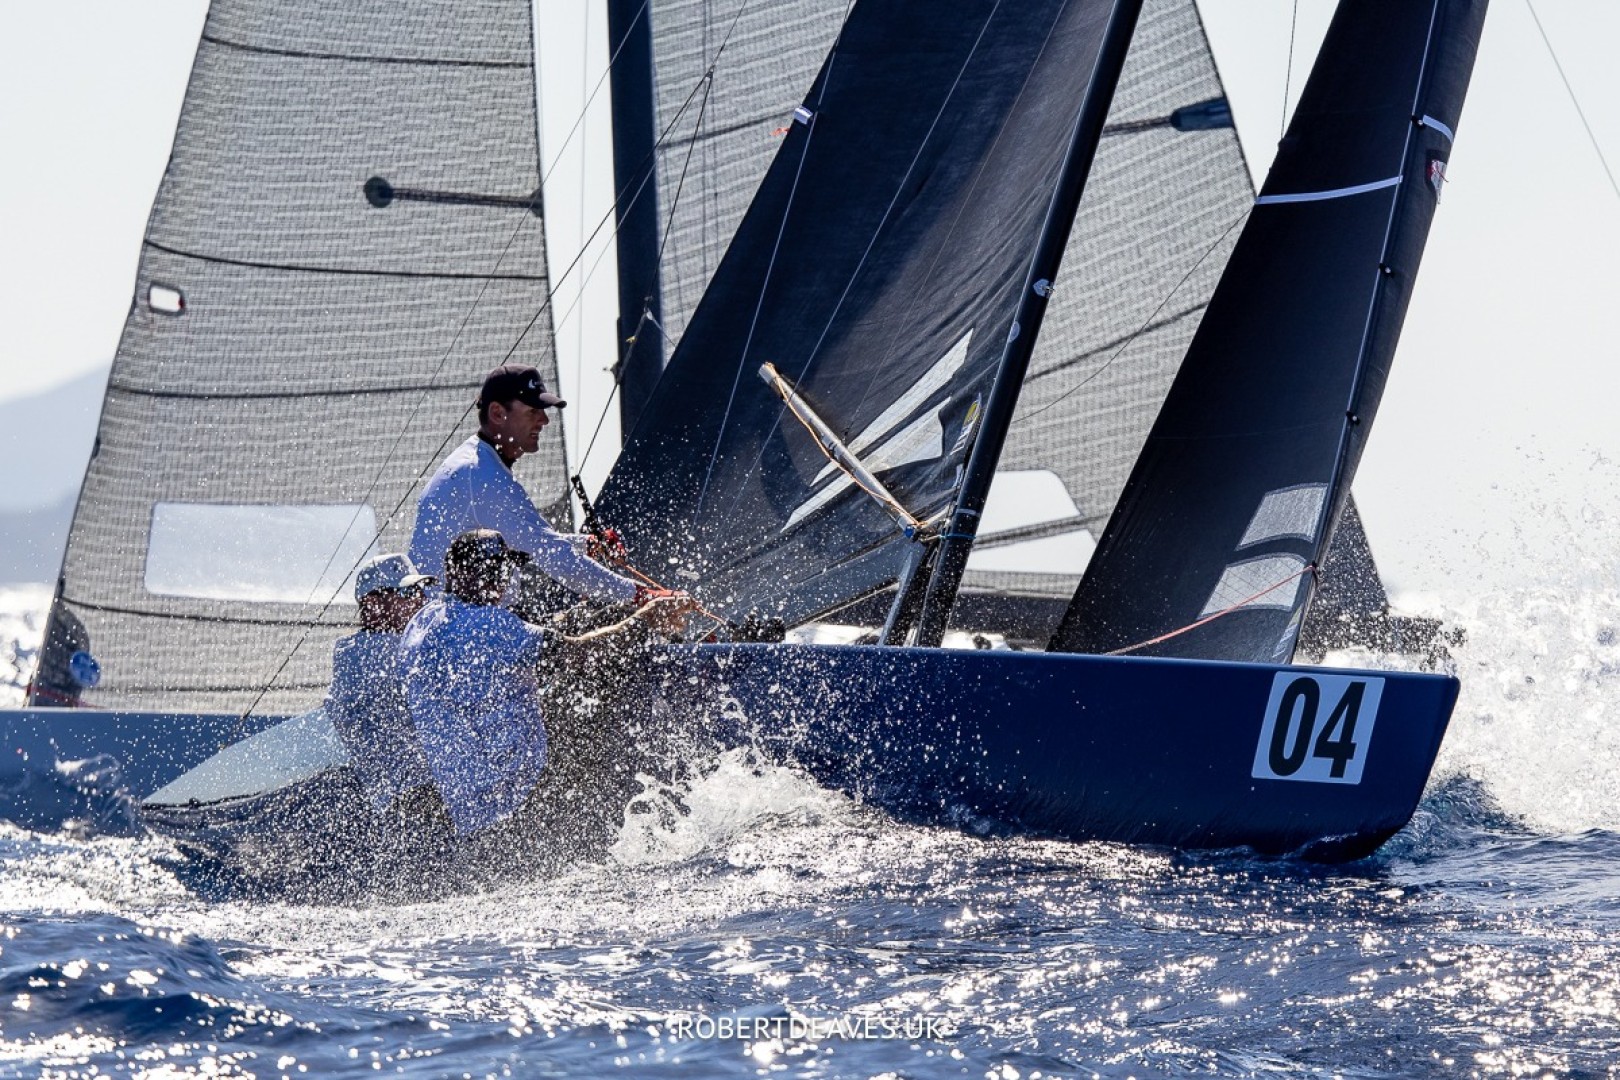 Aspire seizes lead on Day 2 of 5.5 Metre World Championship